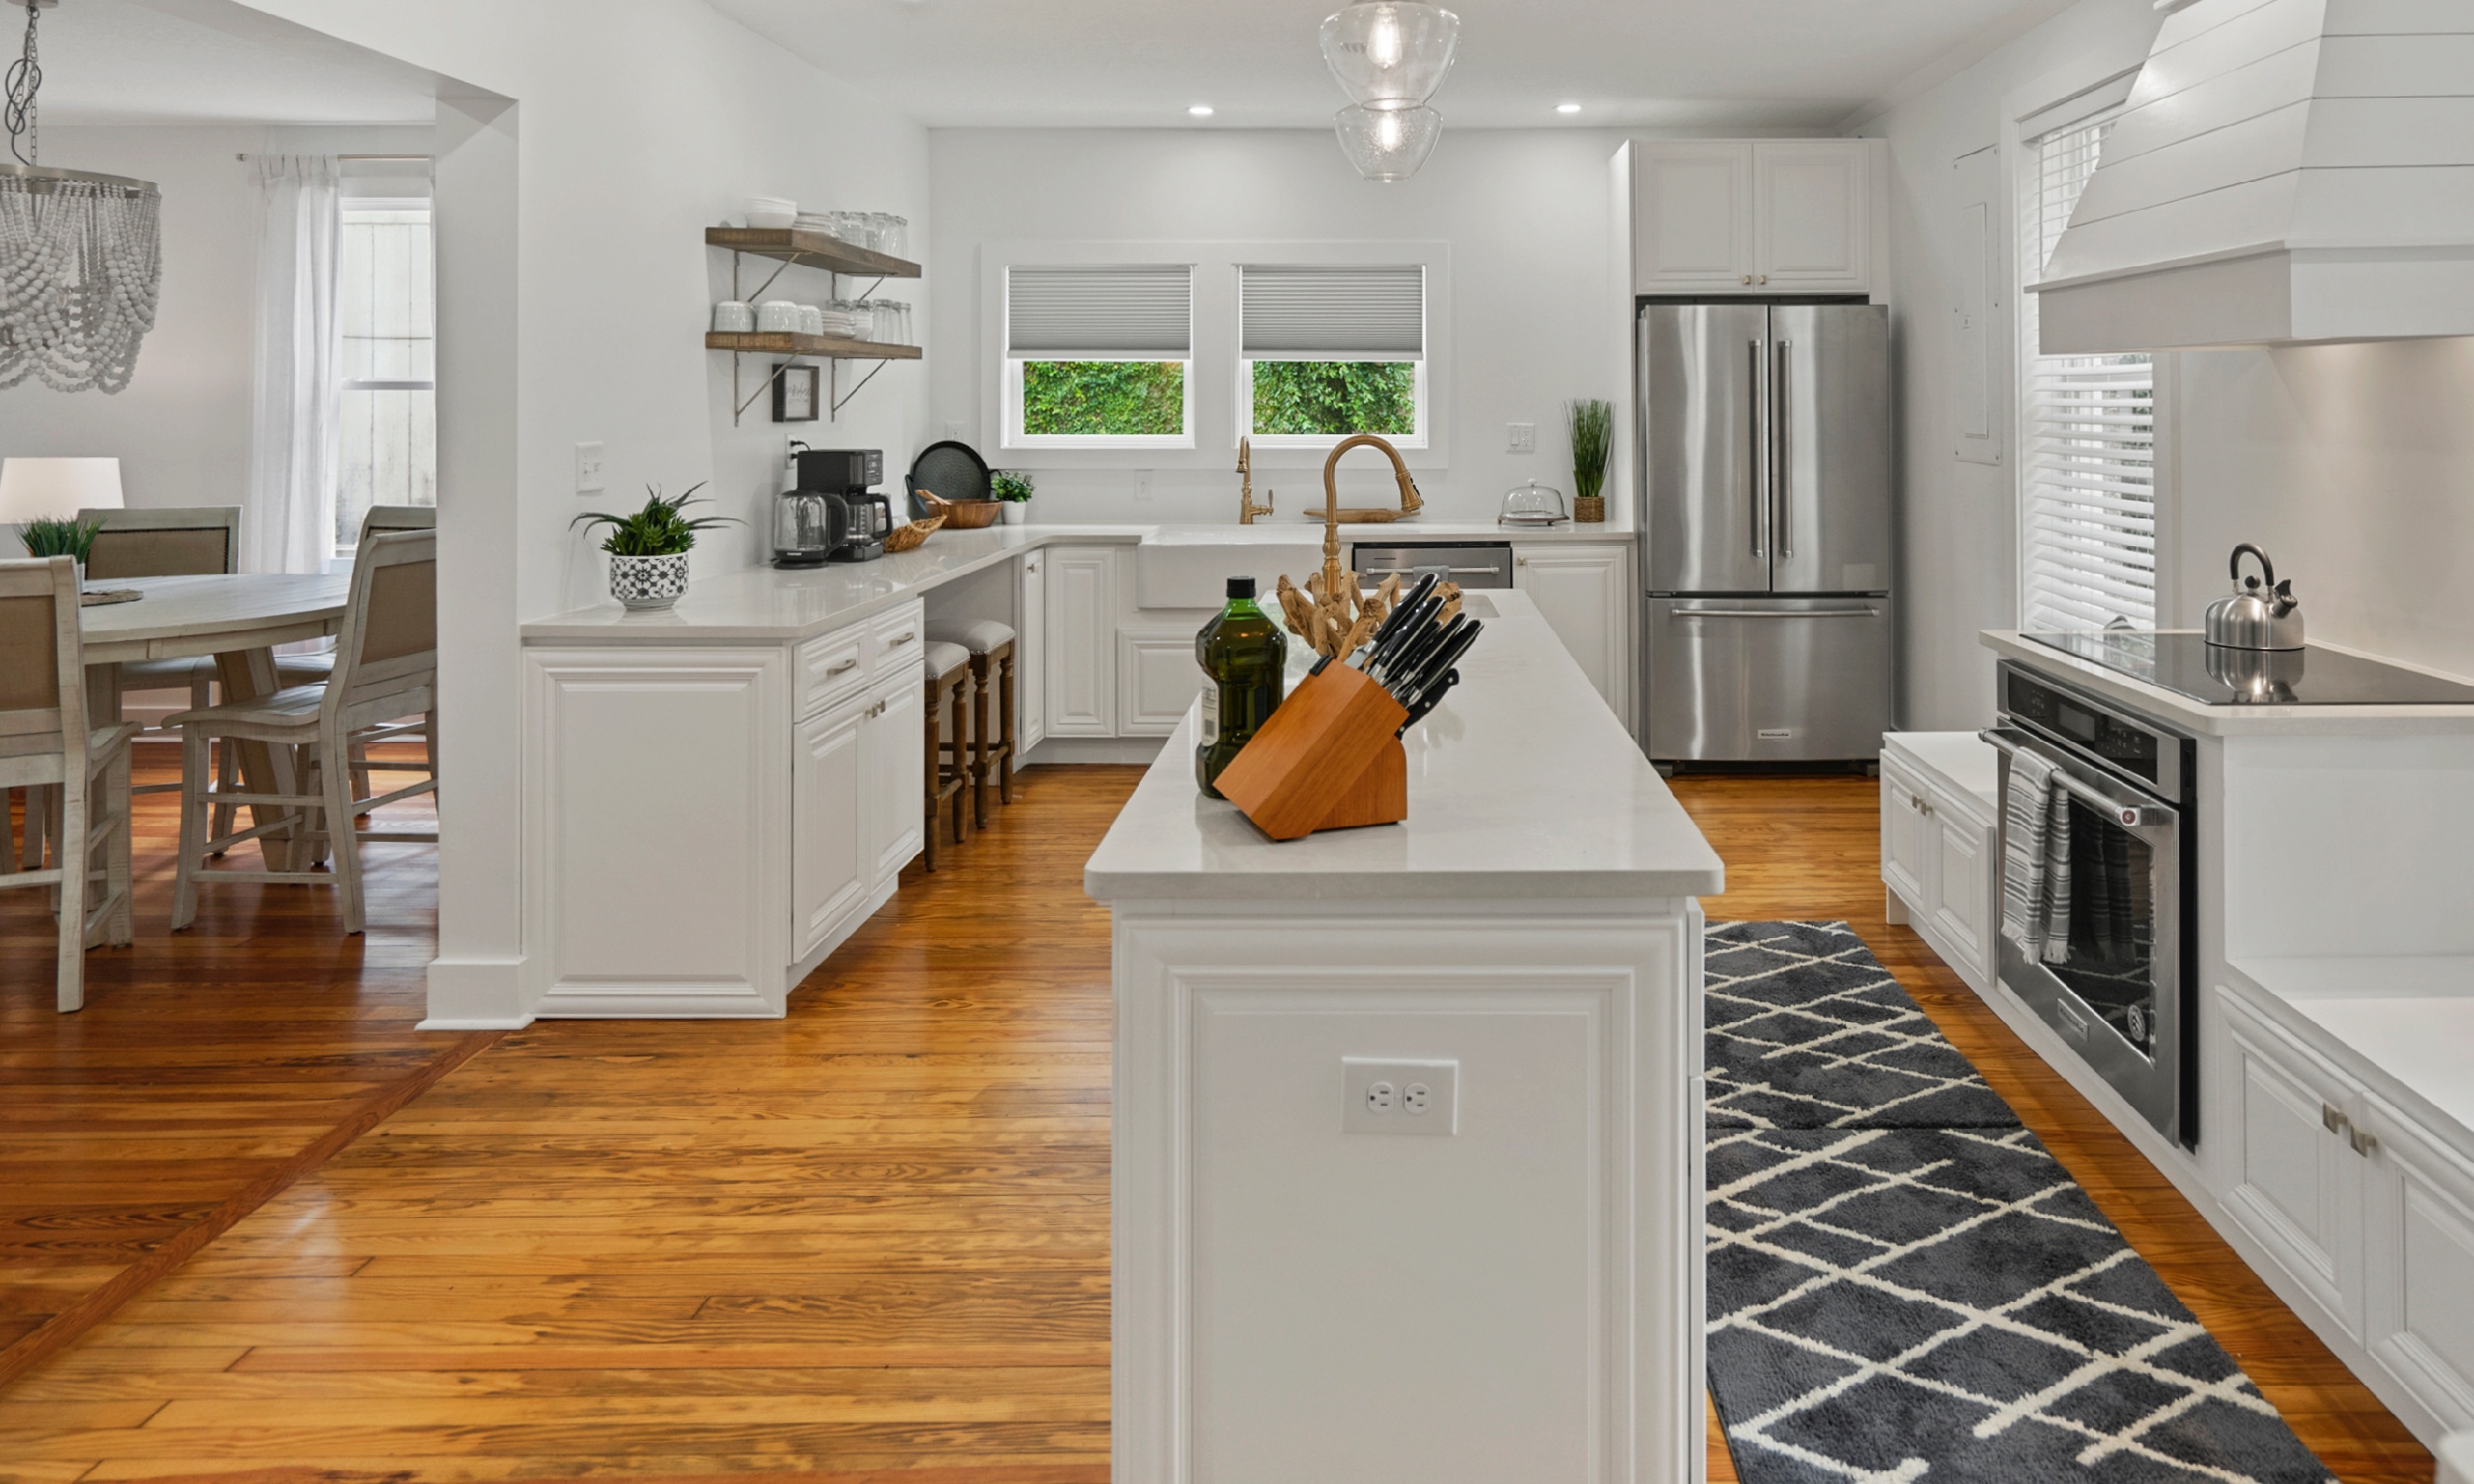 A large kitchen, in white, opens to a diningroom, both with natural wood floors